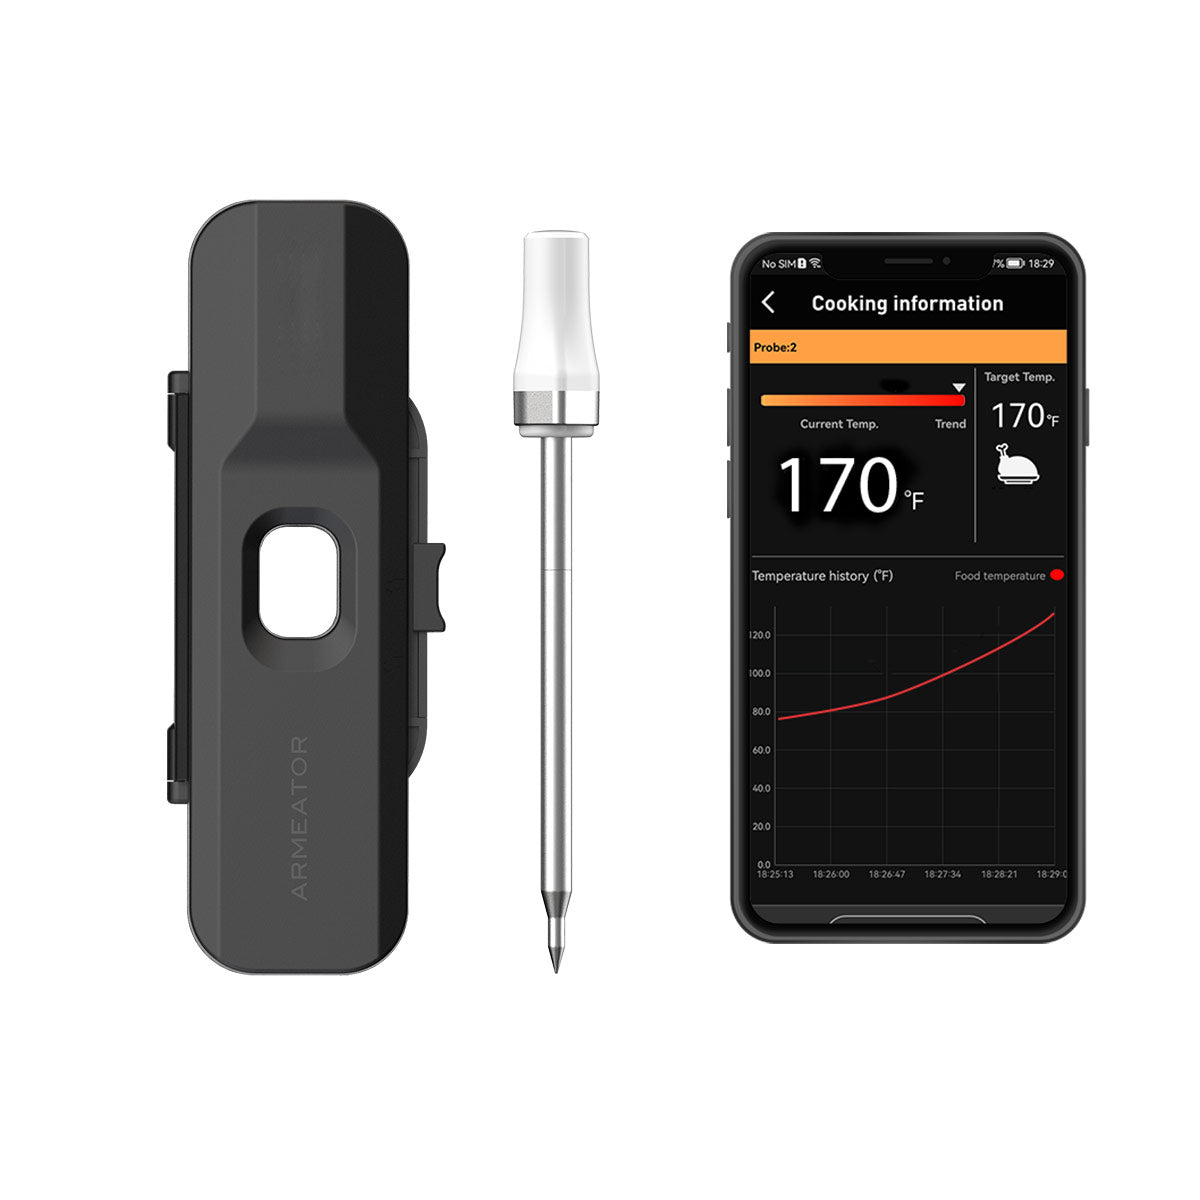 Armeator Wireless Meat Thermometer, 932°F High-Temperature